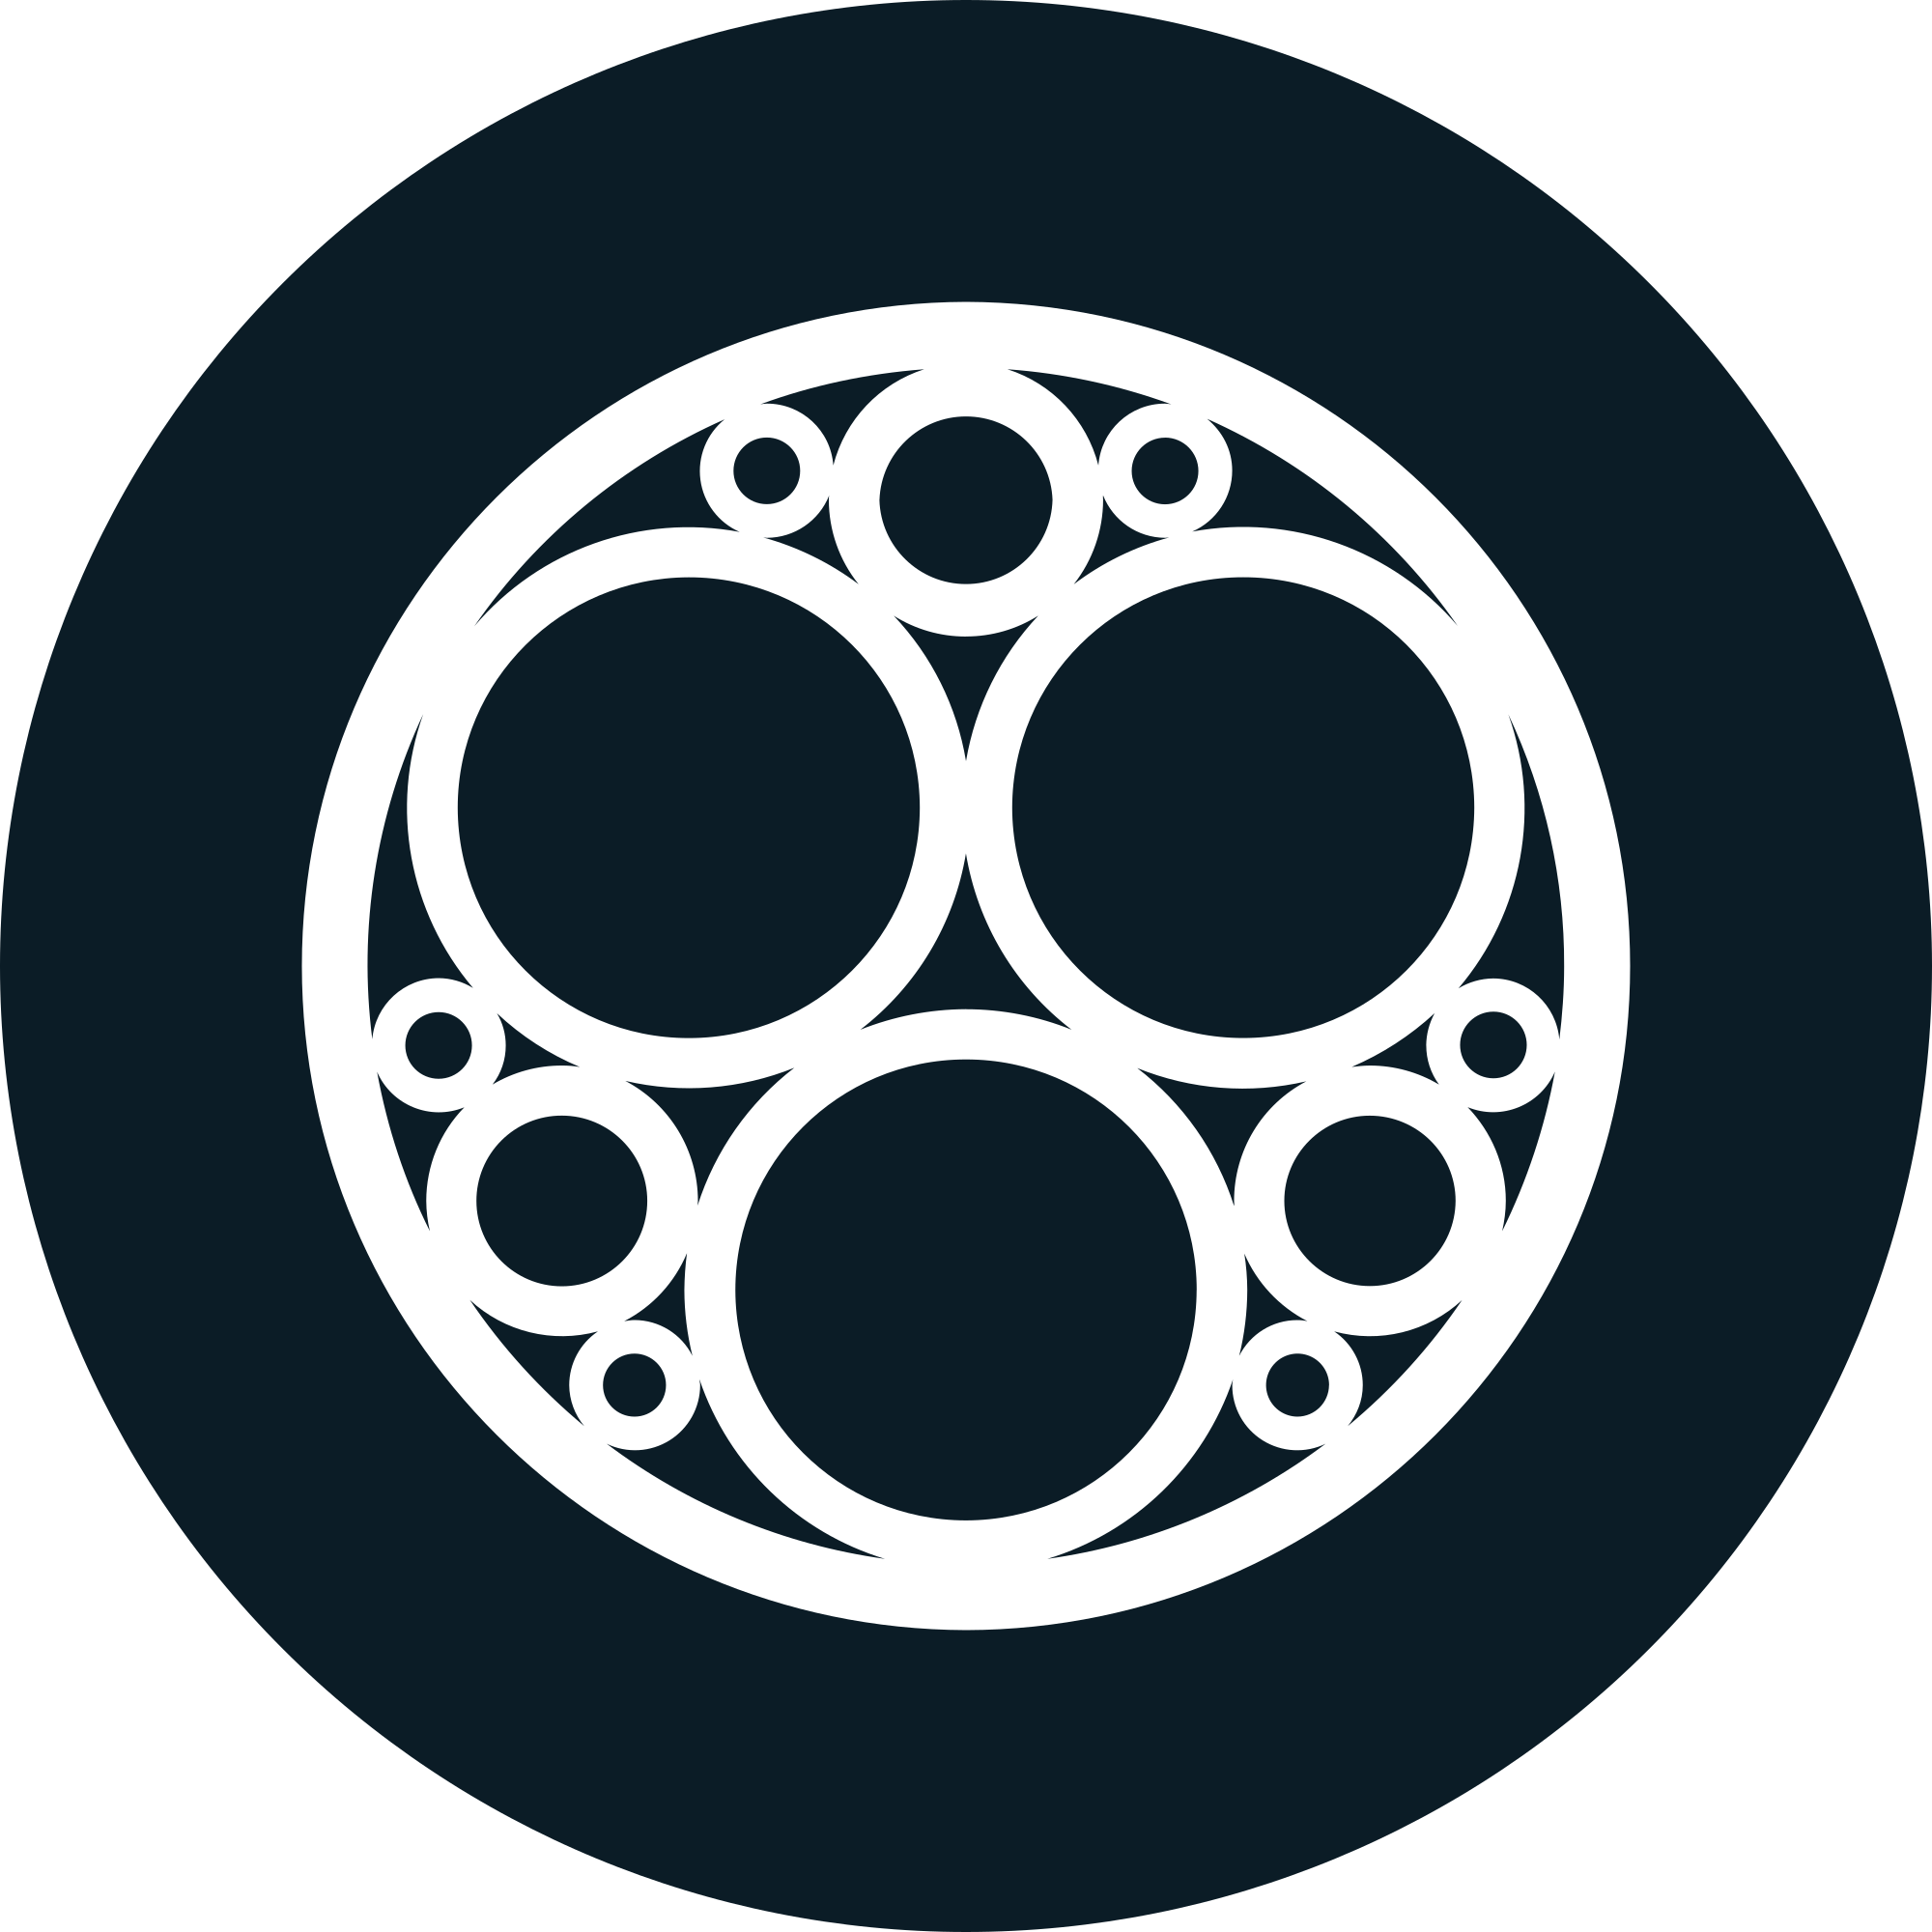 SONM (SNM) Logo .SVG and .PNG Files Download